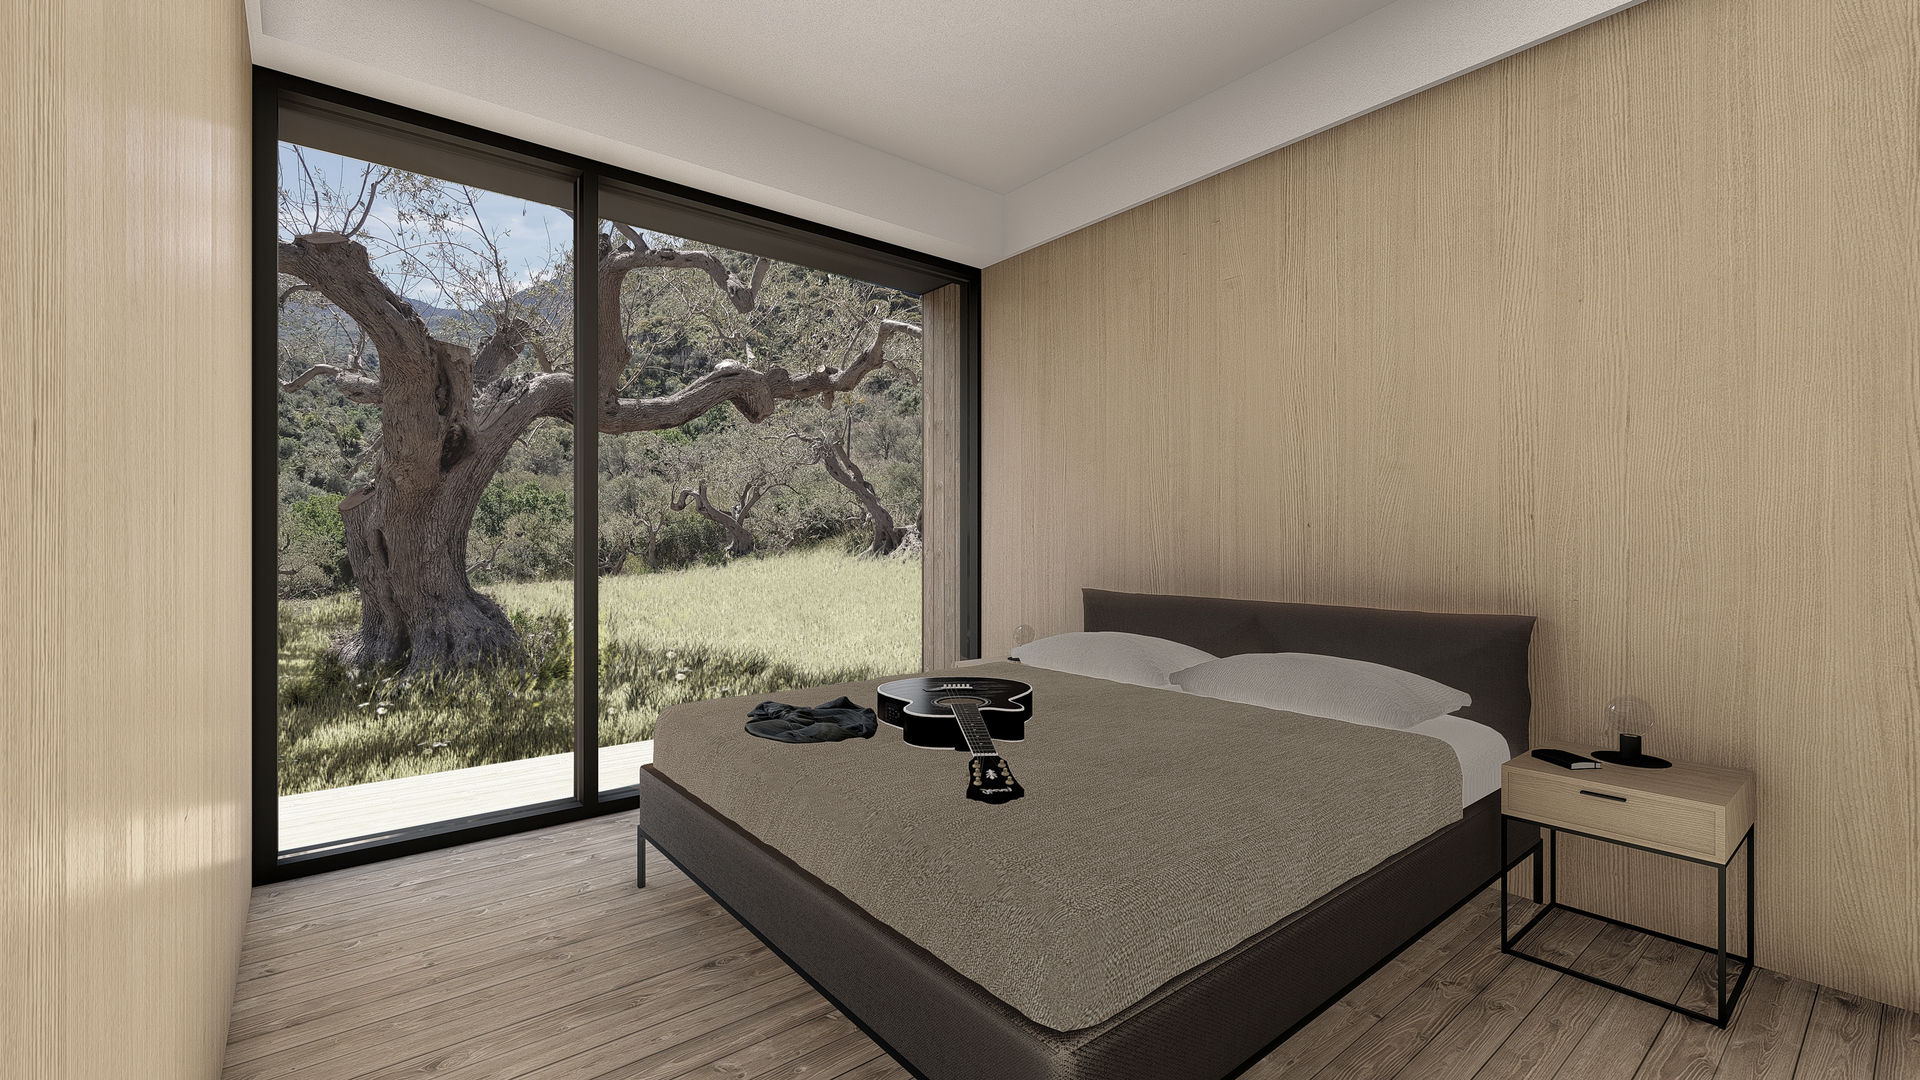 WOODEN HOUSE G|C – SICILY, ALESSIO LO BELLO ARCHITETTO a Palermo ALESSIO LO BELLO ARCHITETTO a Palermo Phòng ngủ phong cách hiện đại Gỗ Wood effect king-size bedroom, glass window, room with a view, queen-size bed, double room